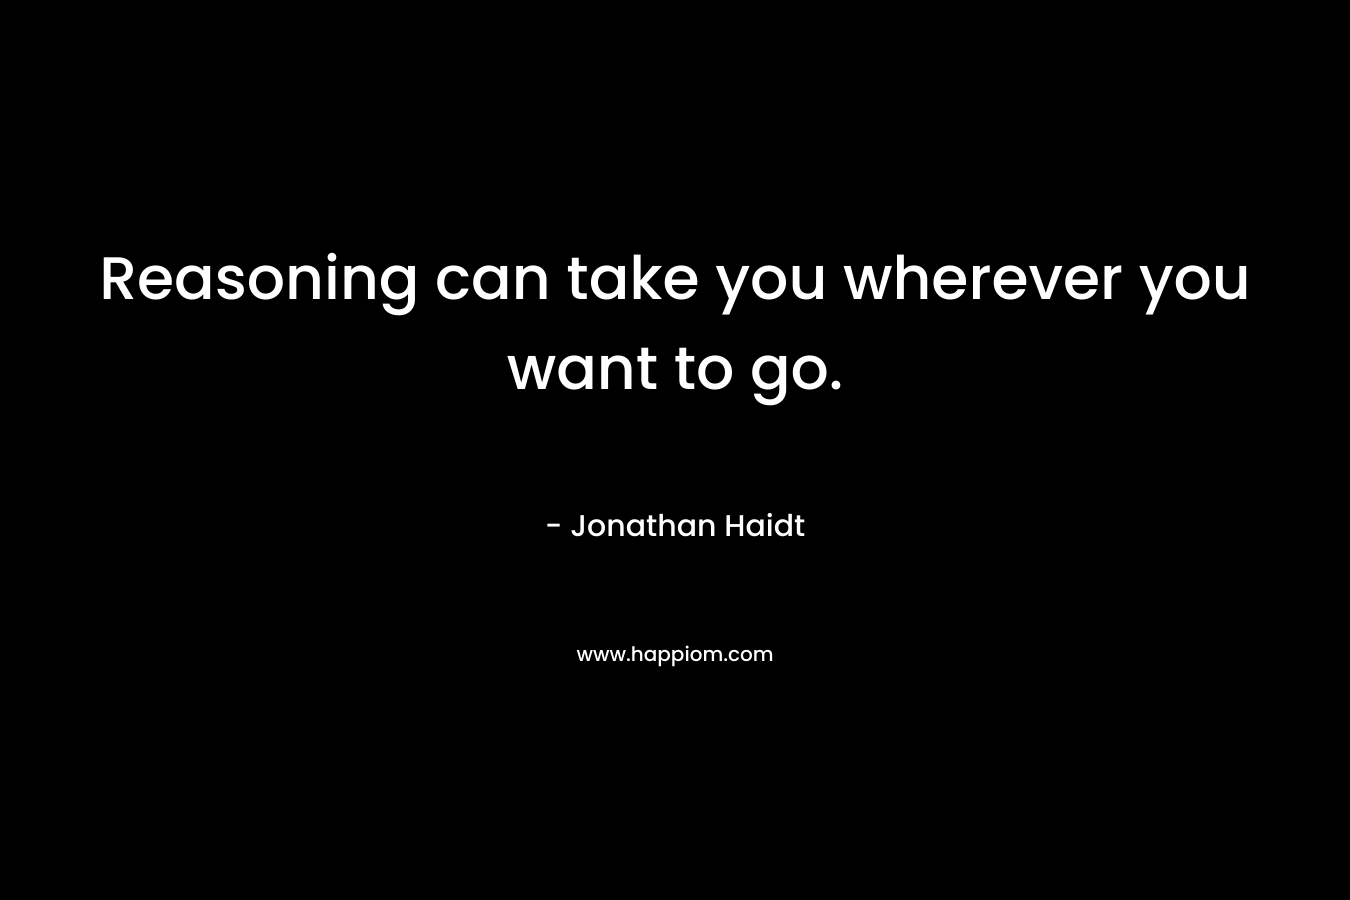 Reasoning can take you wherever you want to go. – Jonathan Haidt